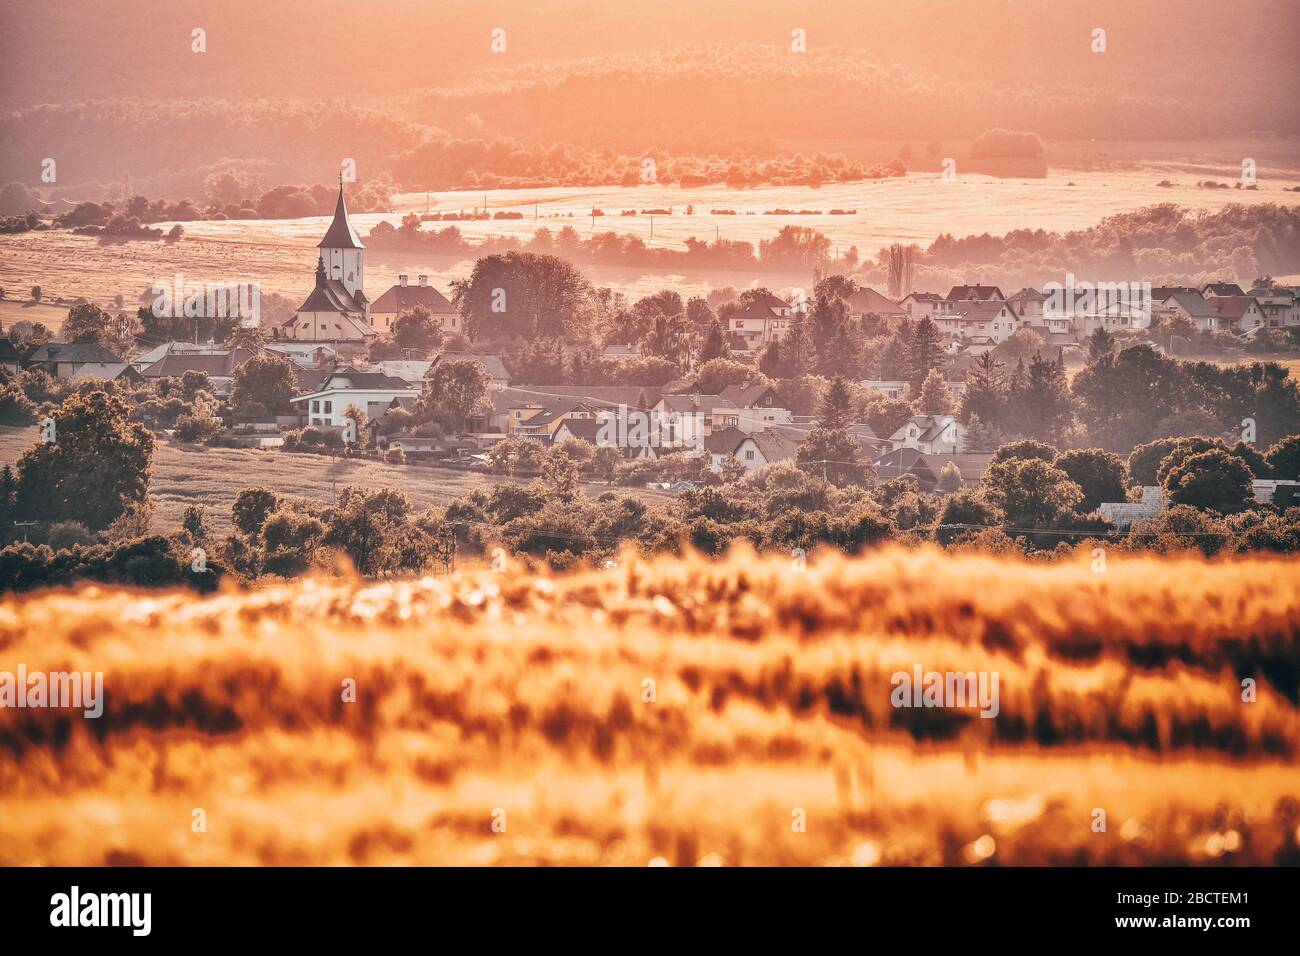 Morning nature with golden wheat and vivid background. In the background is church, village and hills covered by clouds. Nice spring wallpaper Stock Photo